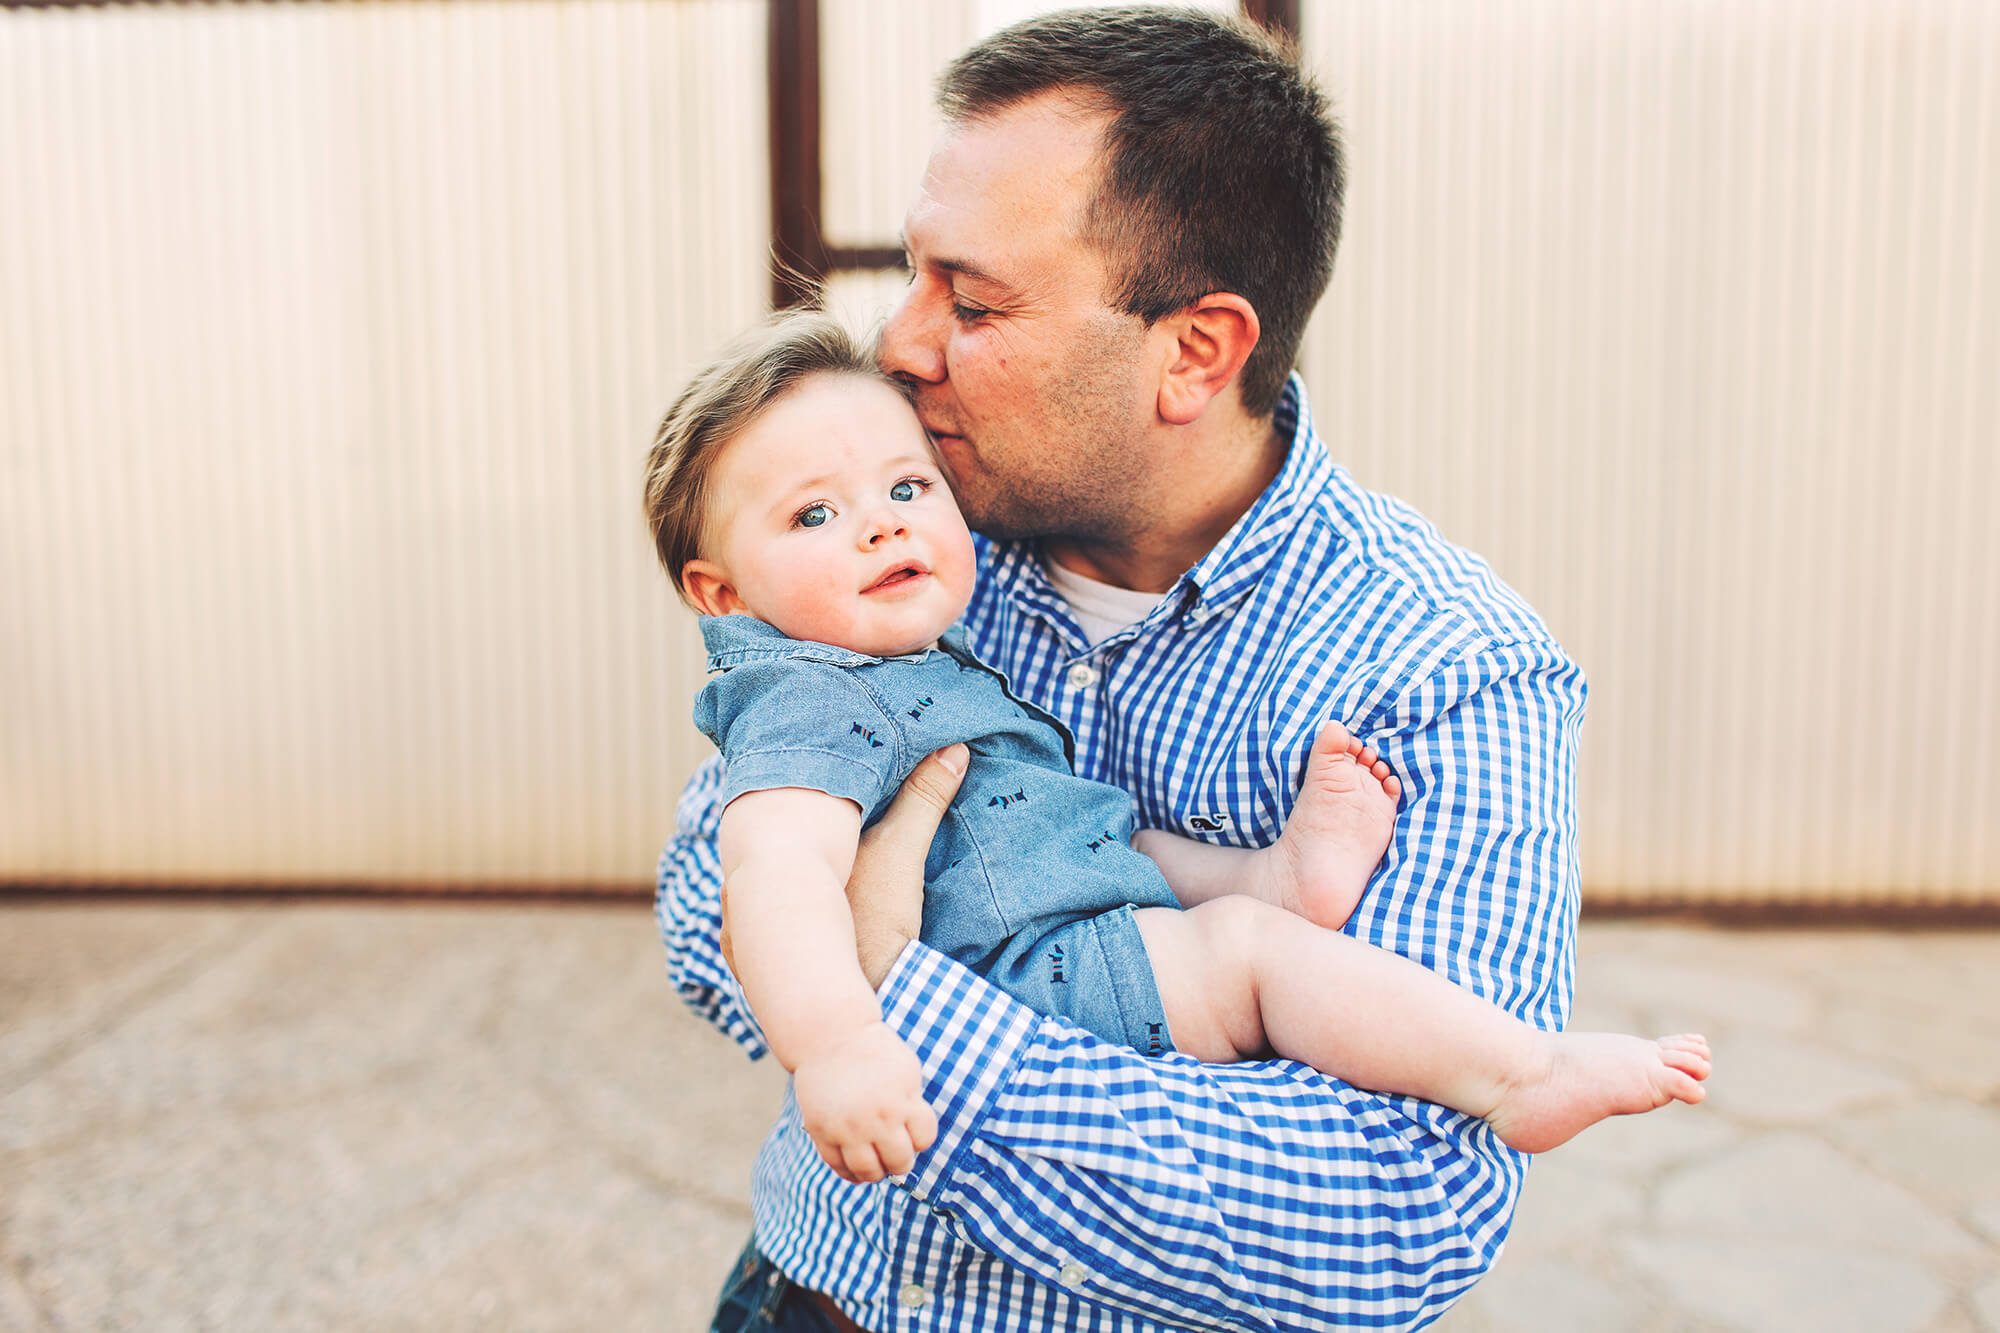 A father kisses his baby boy during their family photo session downtown.